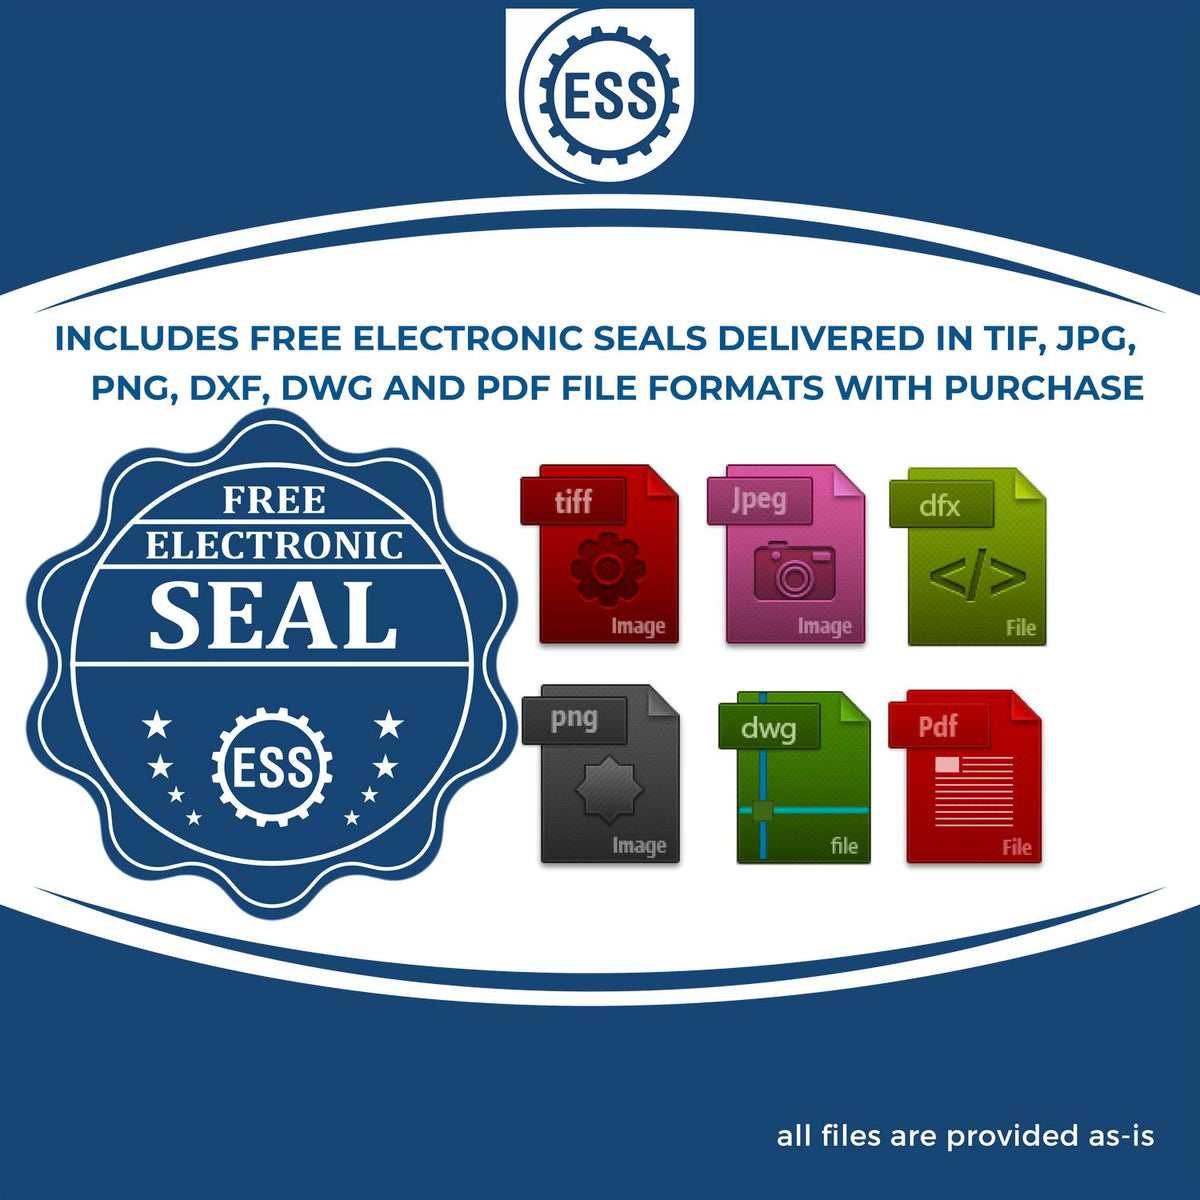 An infographic for the free electronic seal for the Premium MaxLight Pre-Inked District of Columbia Geology Stamp illustrating the different file type icons such as DXF, DWG, TIF, JPG and PNG.